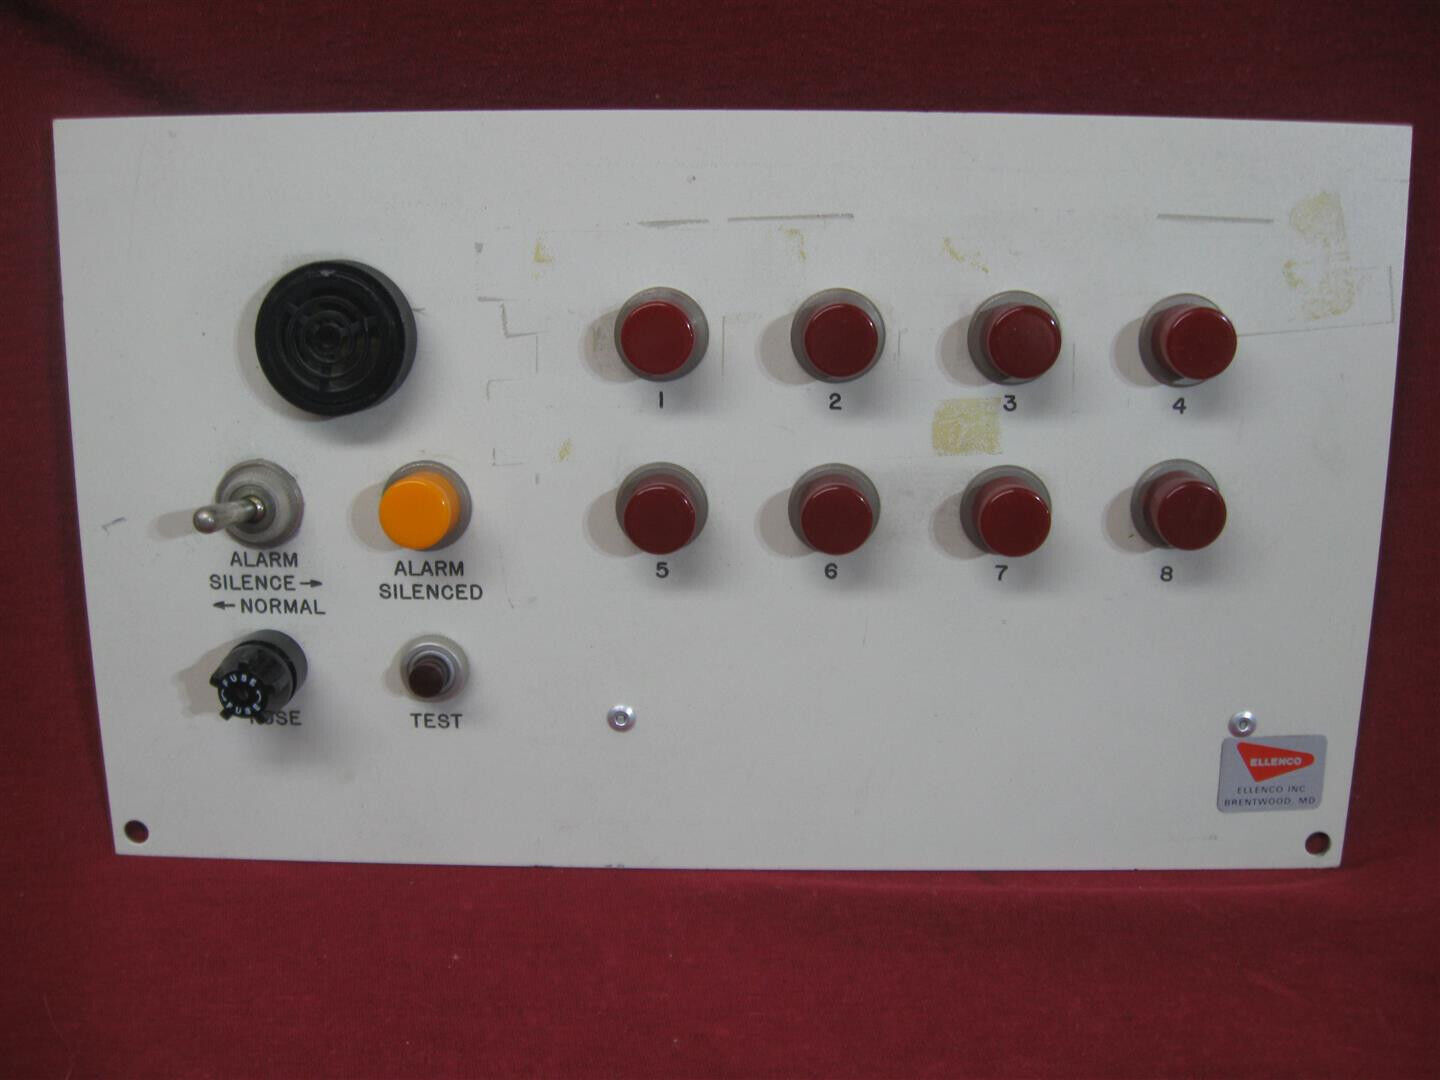 Vintage Ellenco Fire Alarm Control Panel Untested Offers Welcome